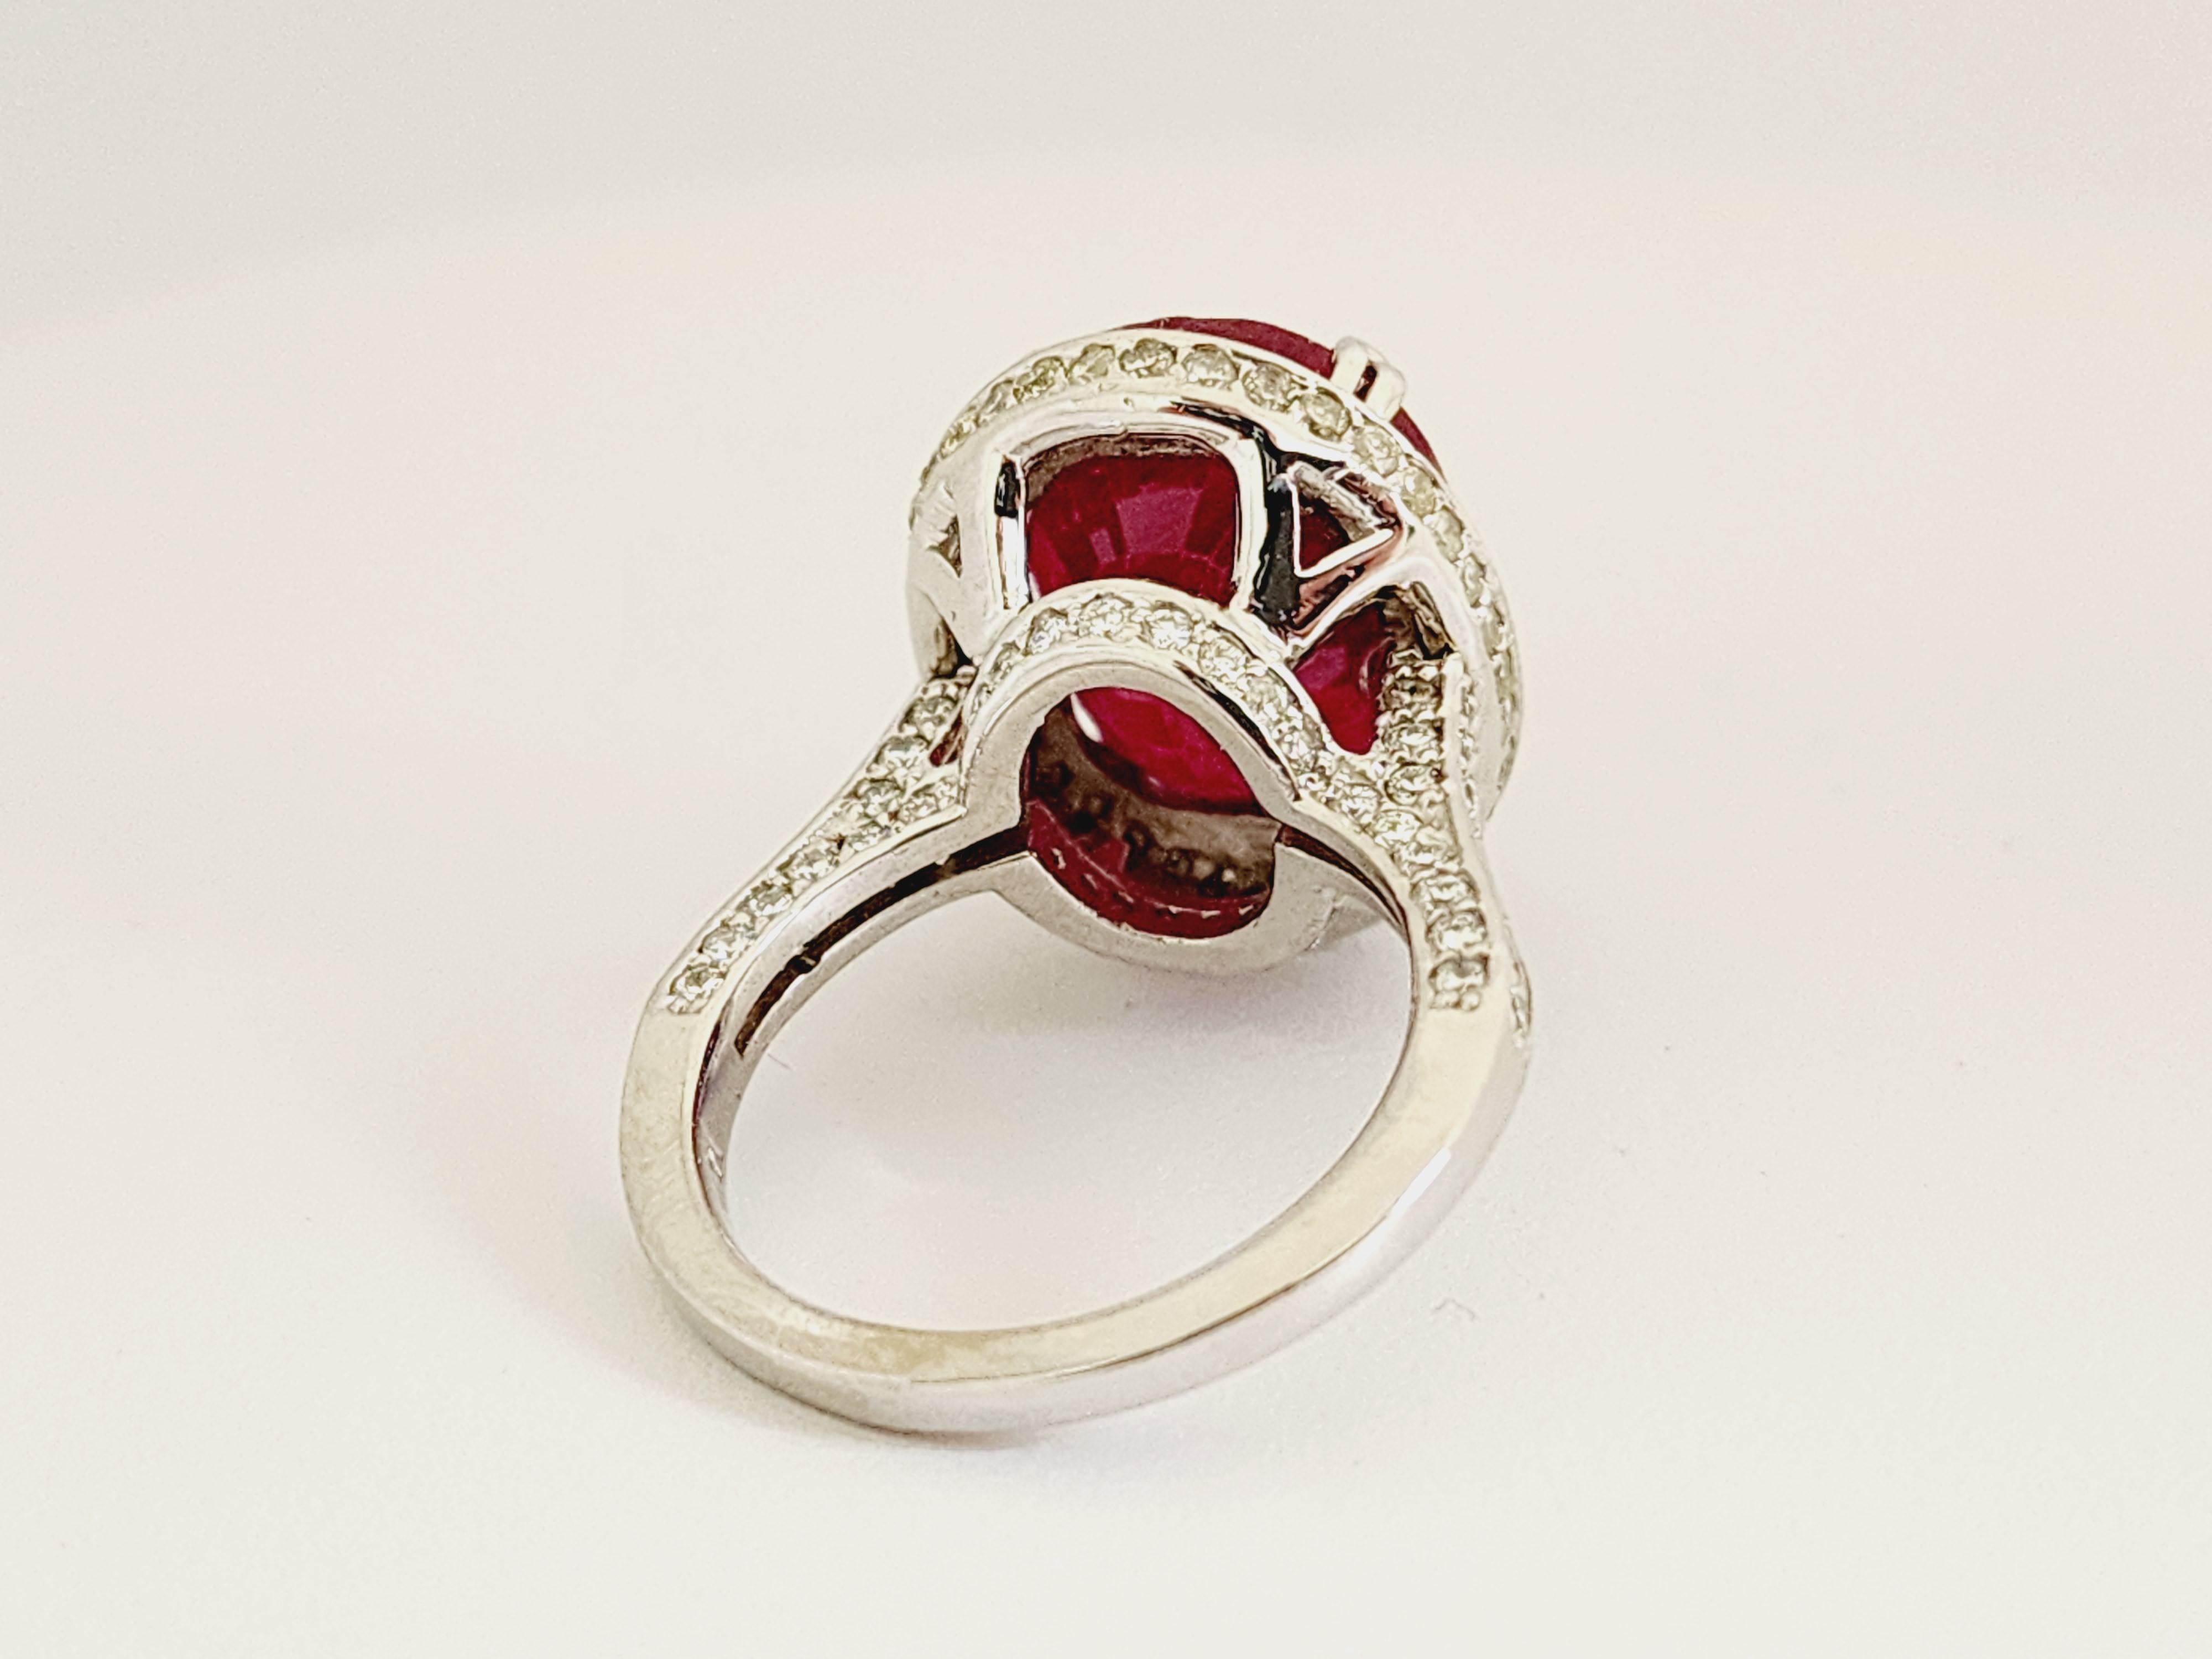 Genuine Ruby oval shape surround by natural diamonds on the ring 14K white gold. Unique, Brilliant, and Beautiful.

Ruby Size: 13.82 ctw Glass Filled
Diamonds: 2.35 cttw Average I-SI
Ring Size: 7
